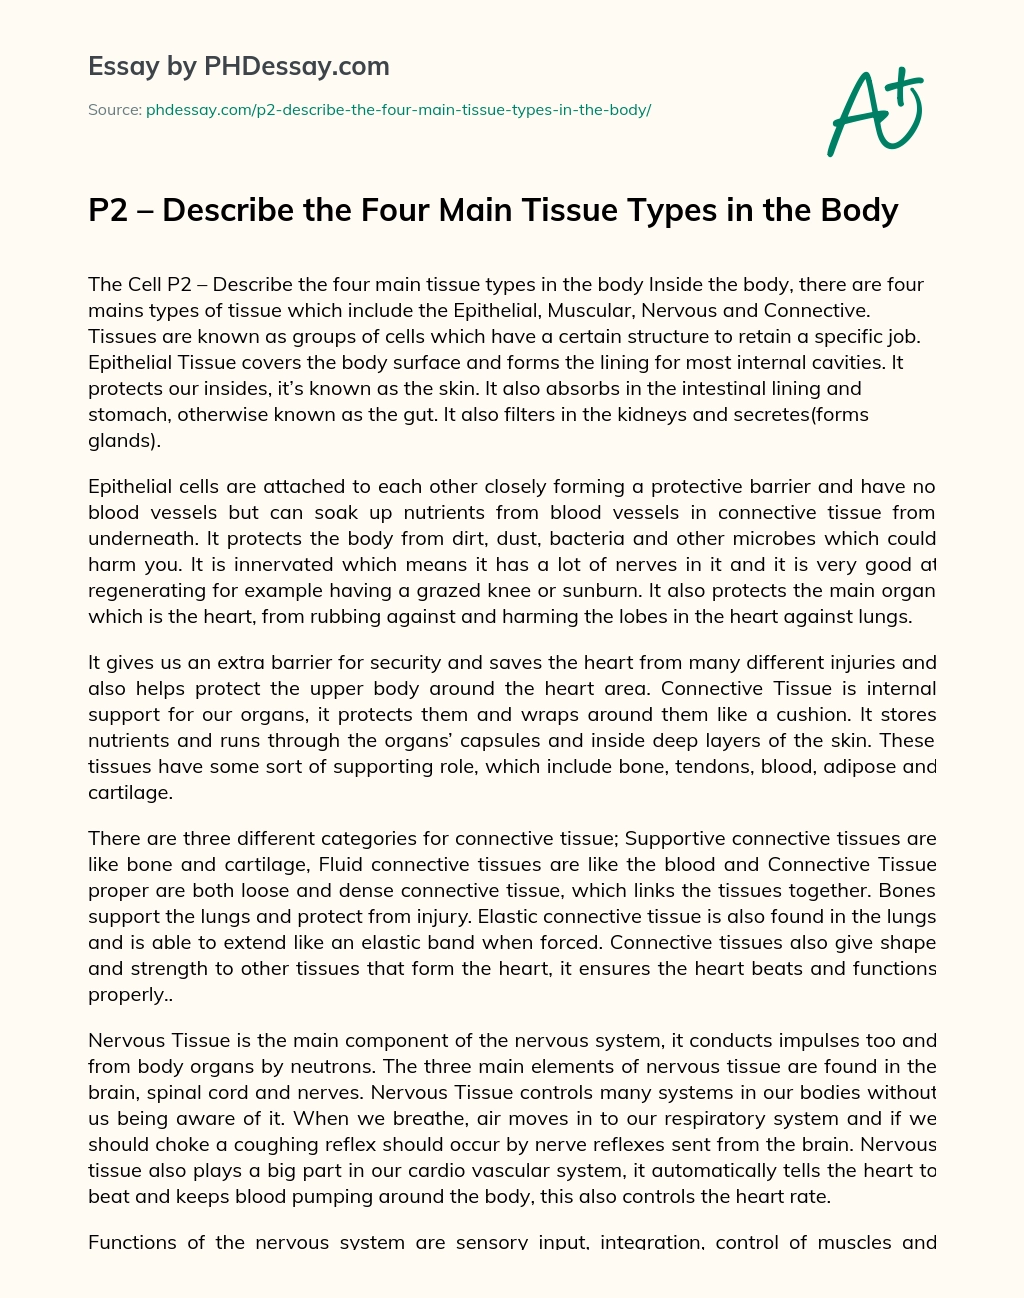 P2 – Describe the Four Main Tissue Types in the Body essay